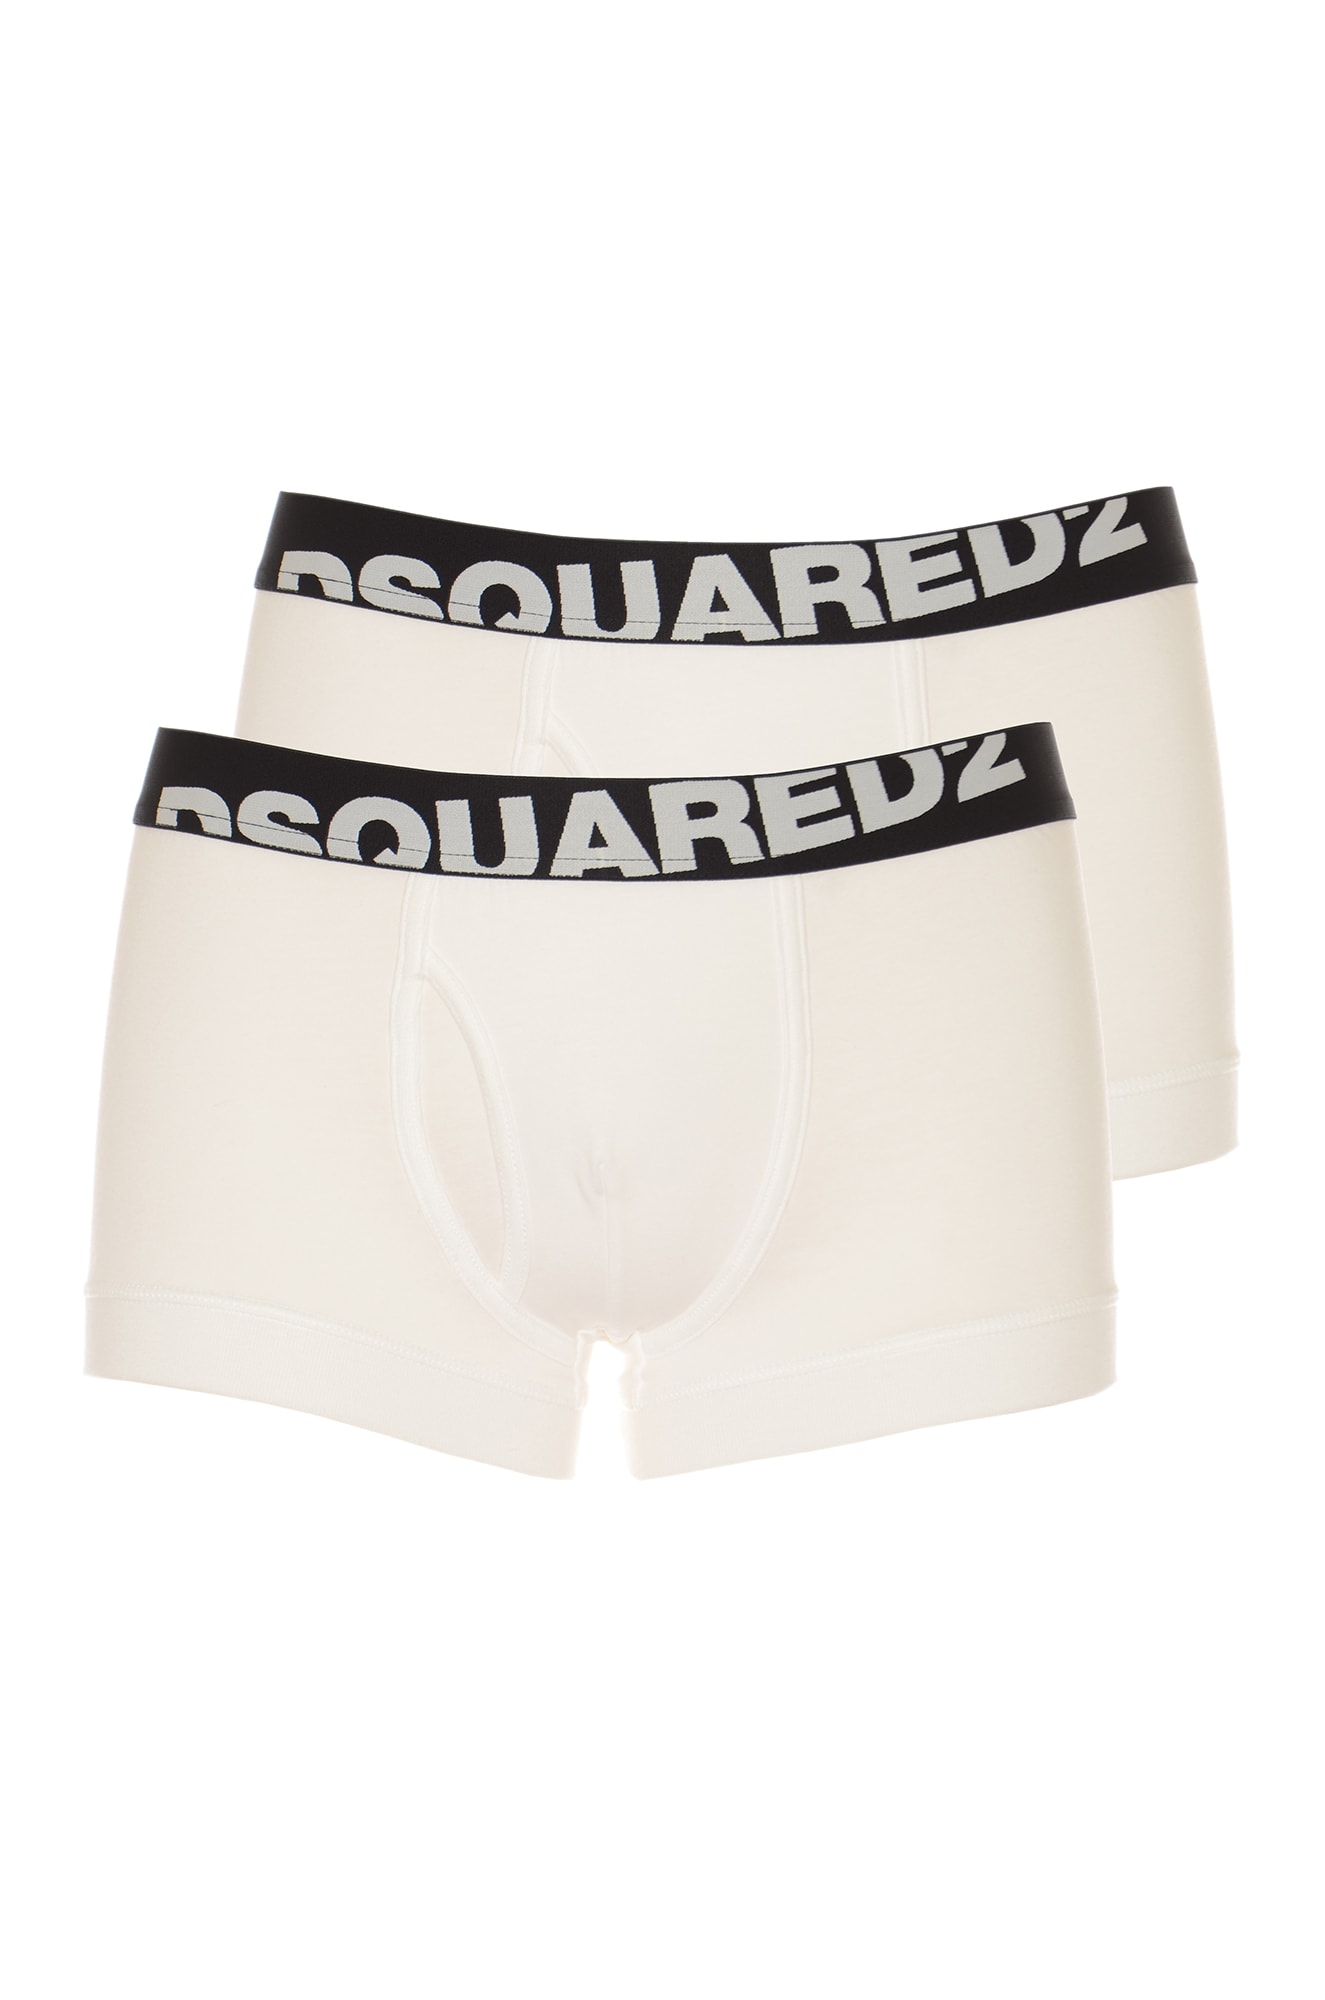 Dsquared2 Logo 2 Boxers Pack